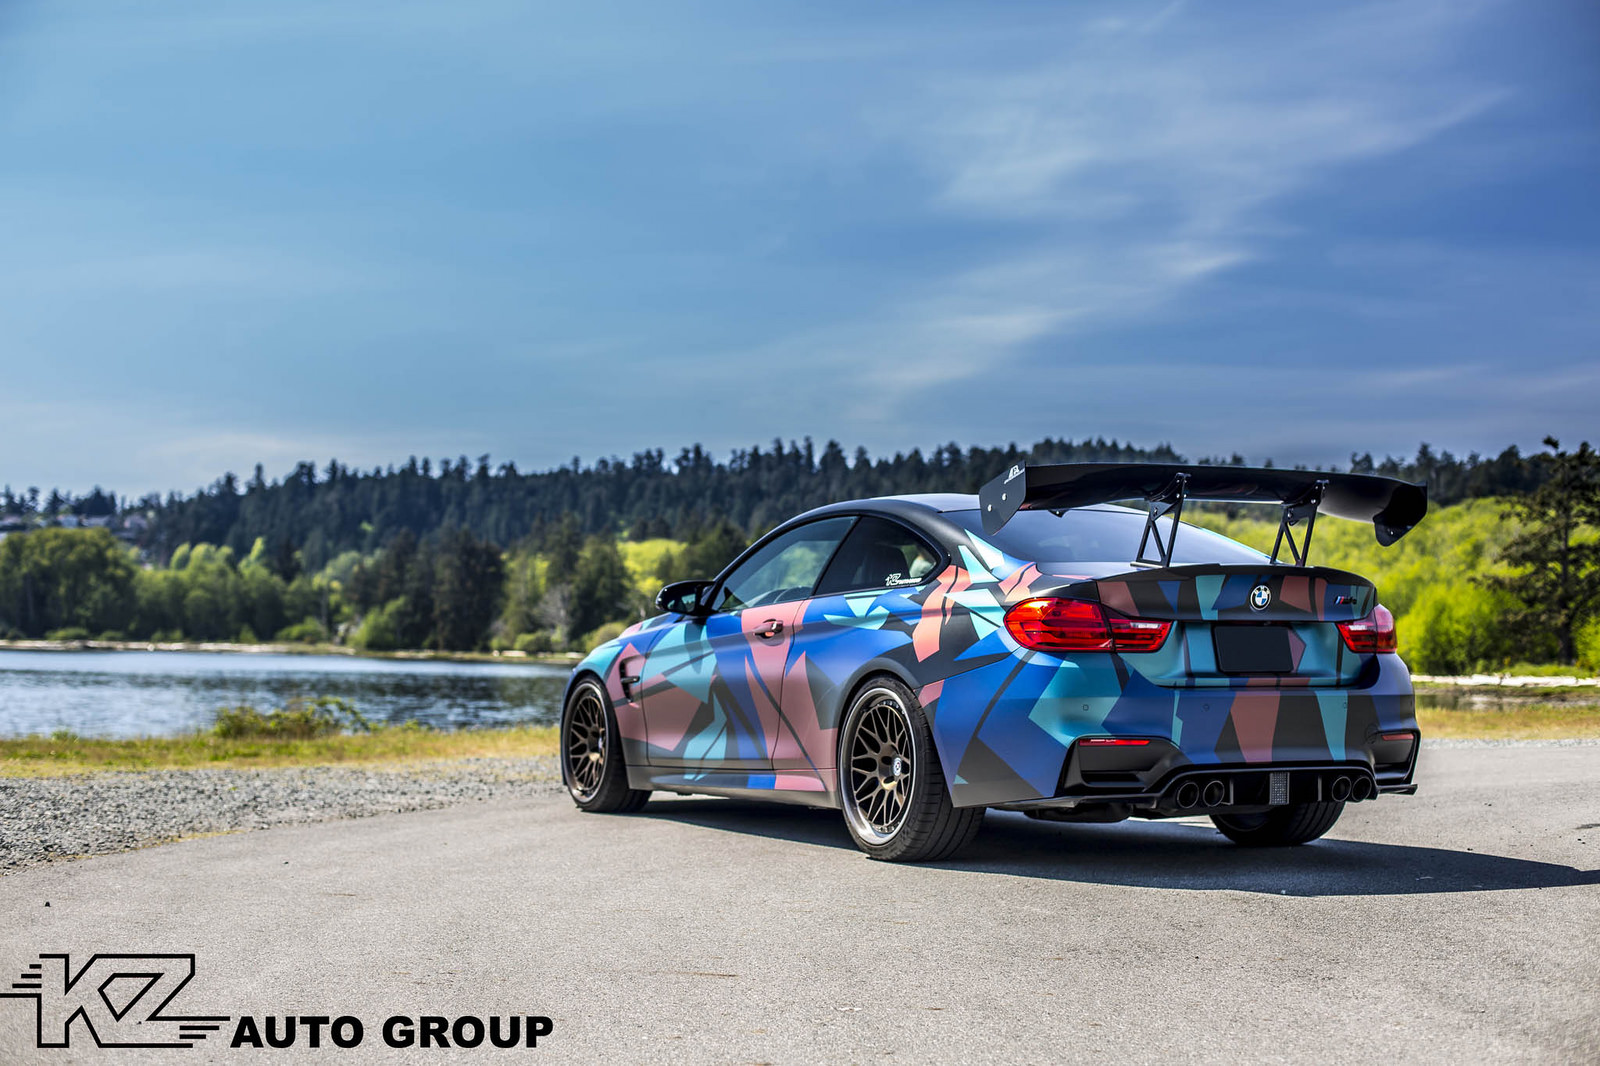 A-BMW-M4-With-A-Crayz-Wrap-And-HRE-Wheels-8